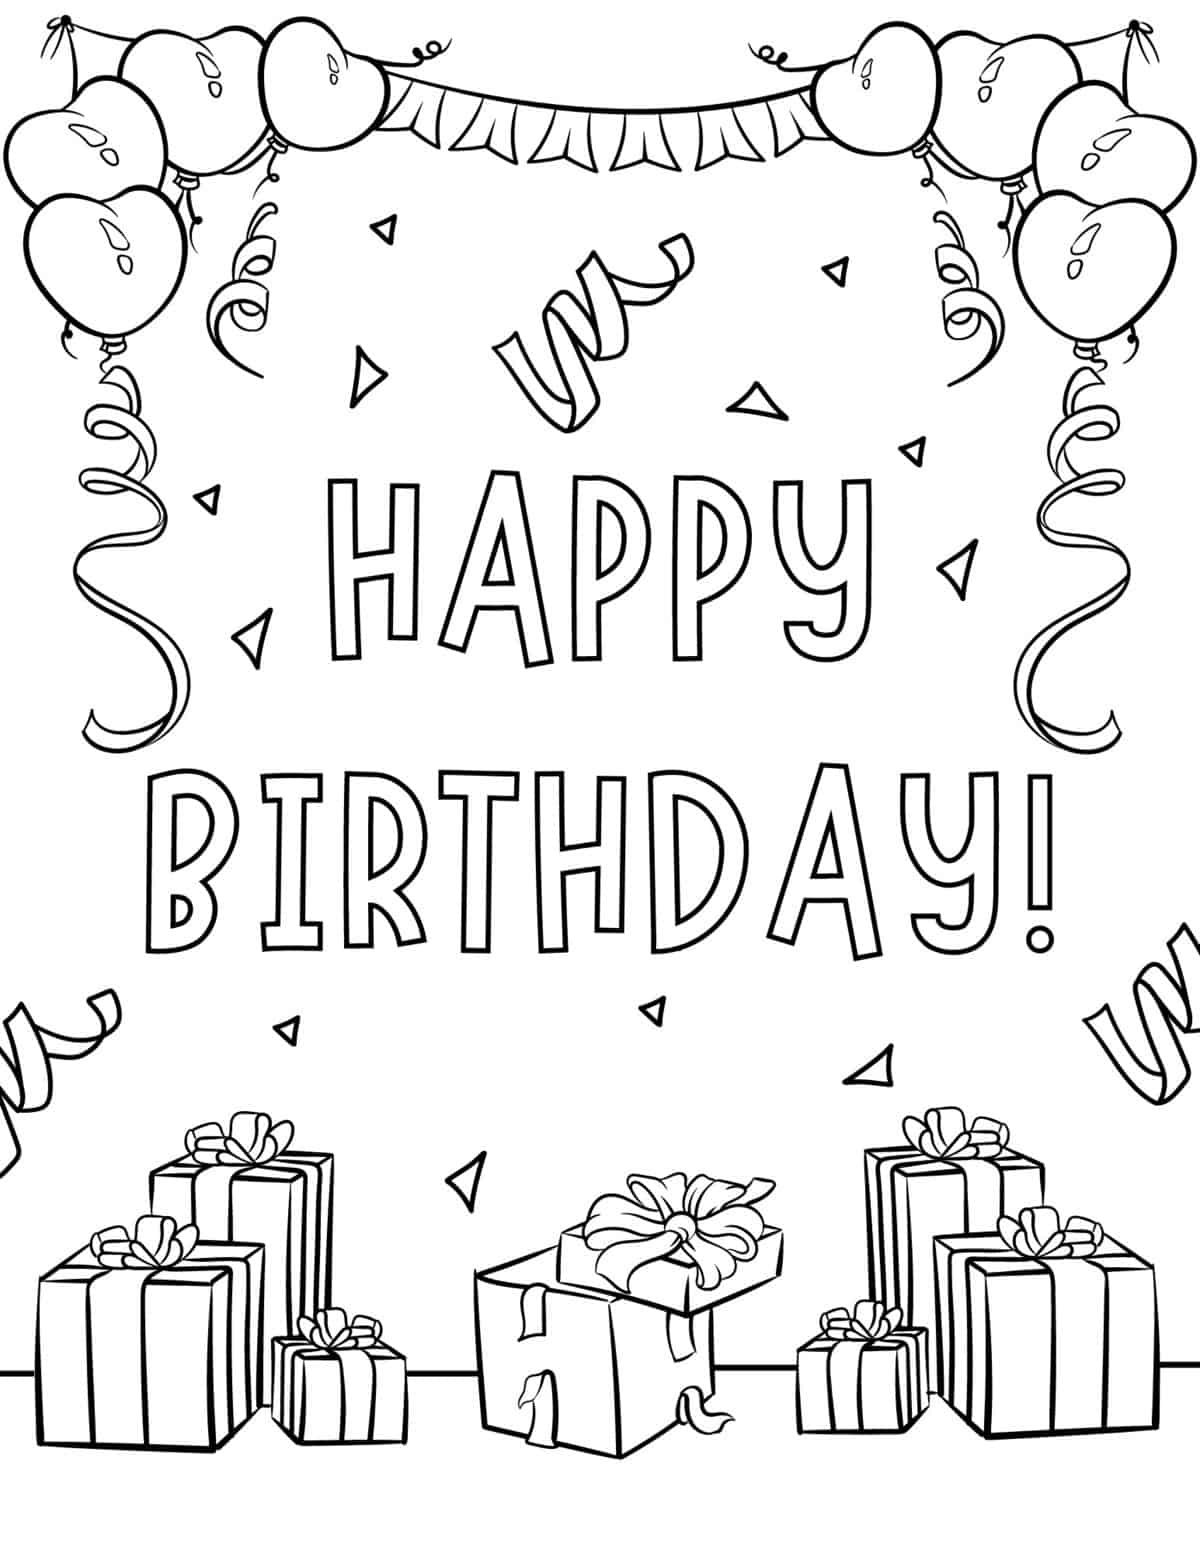 birthday present coloring page